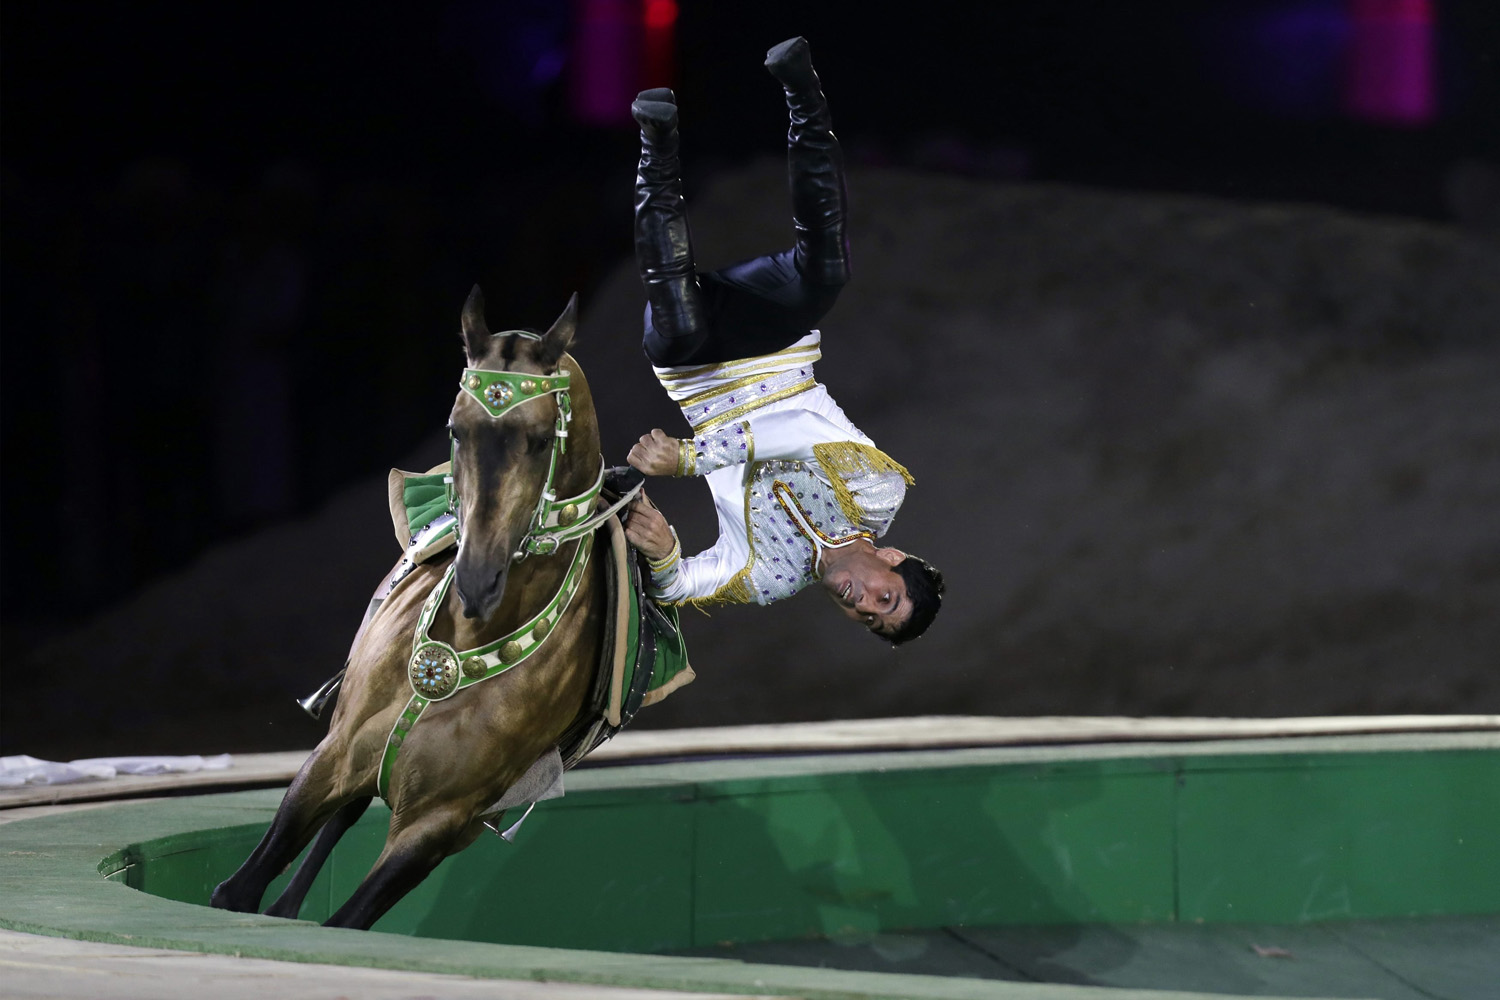 A Turkmenistan man performs on a horse during the opening ceremony of 2014 International Akhal-Teke Horses Association Special Conference and China Horse Culture Festival in Beijing